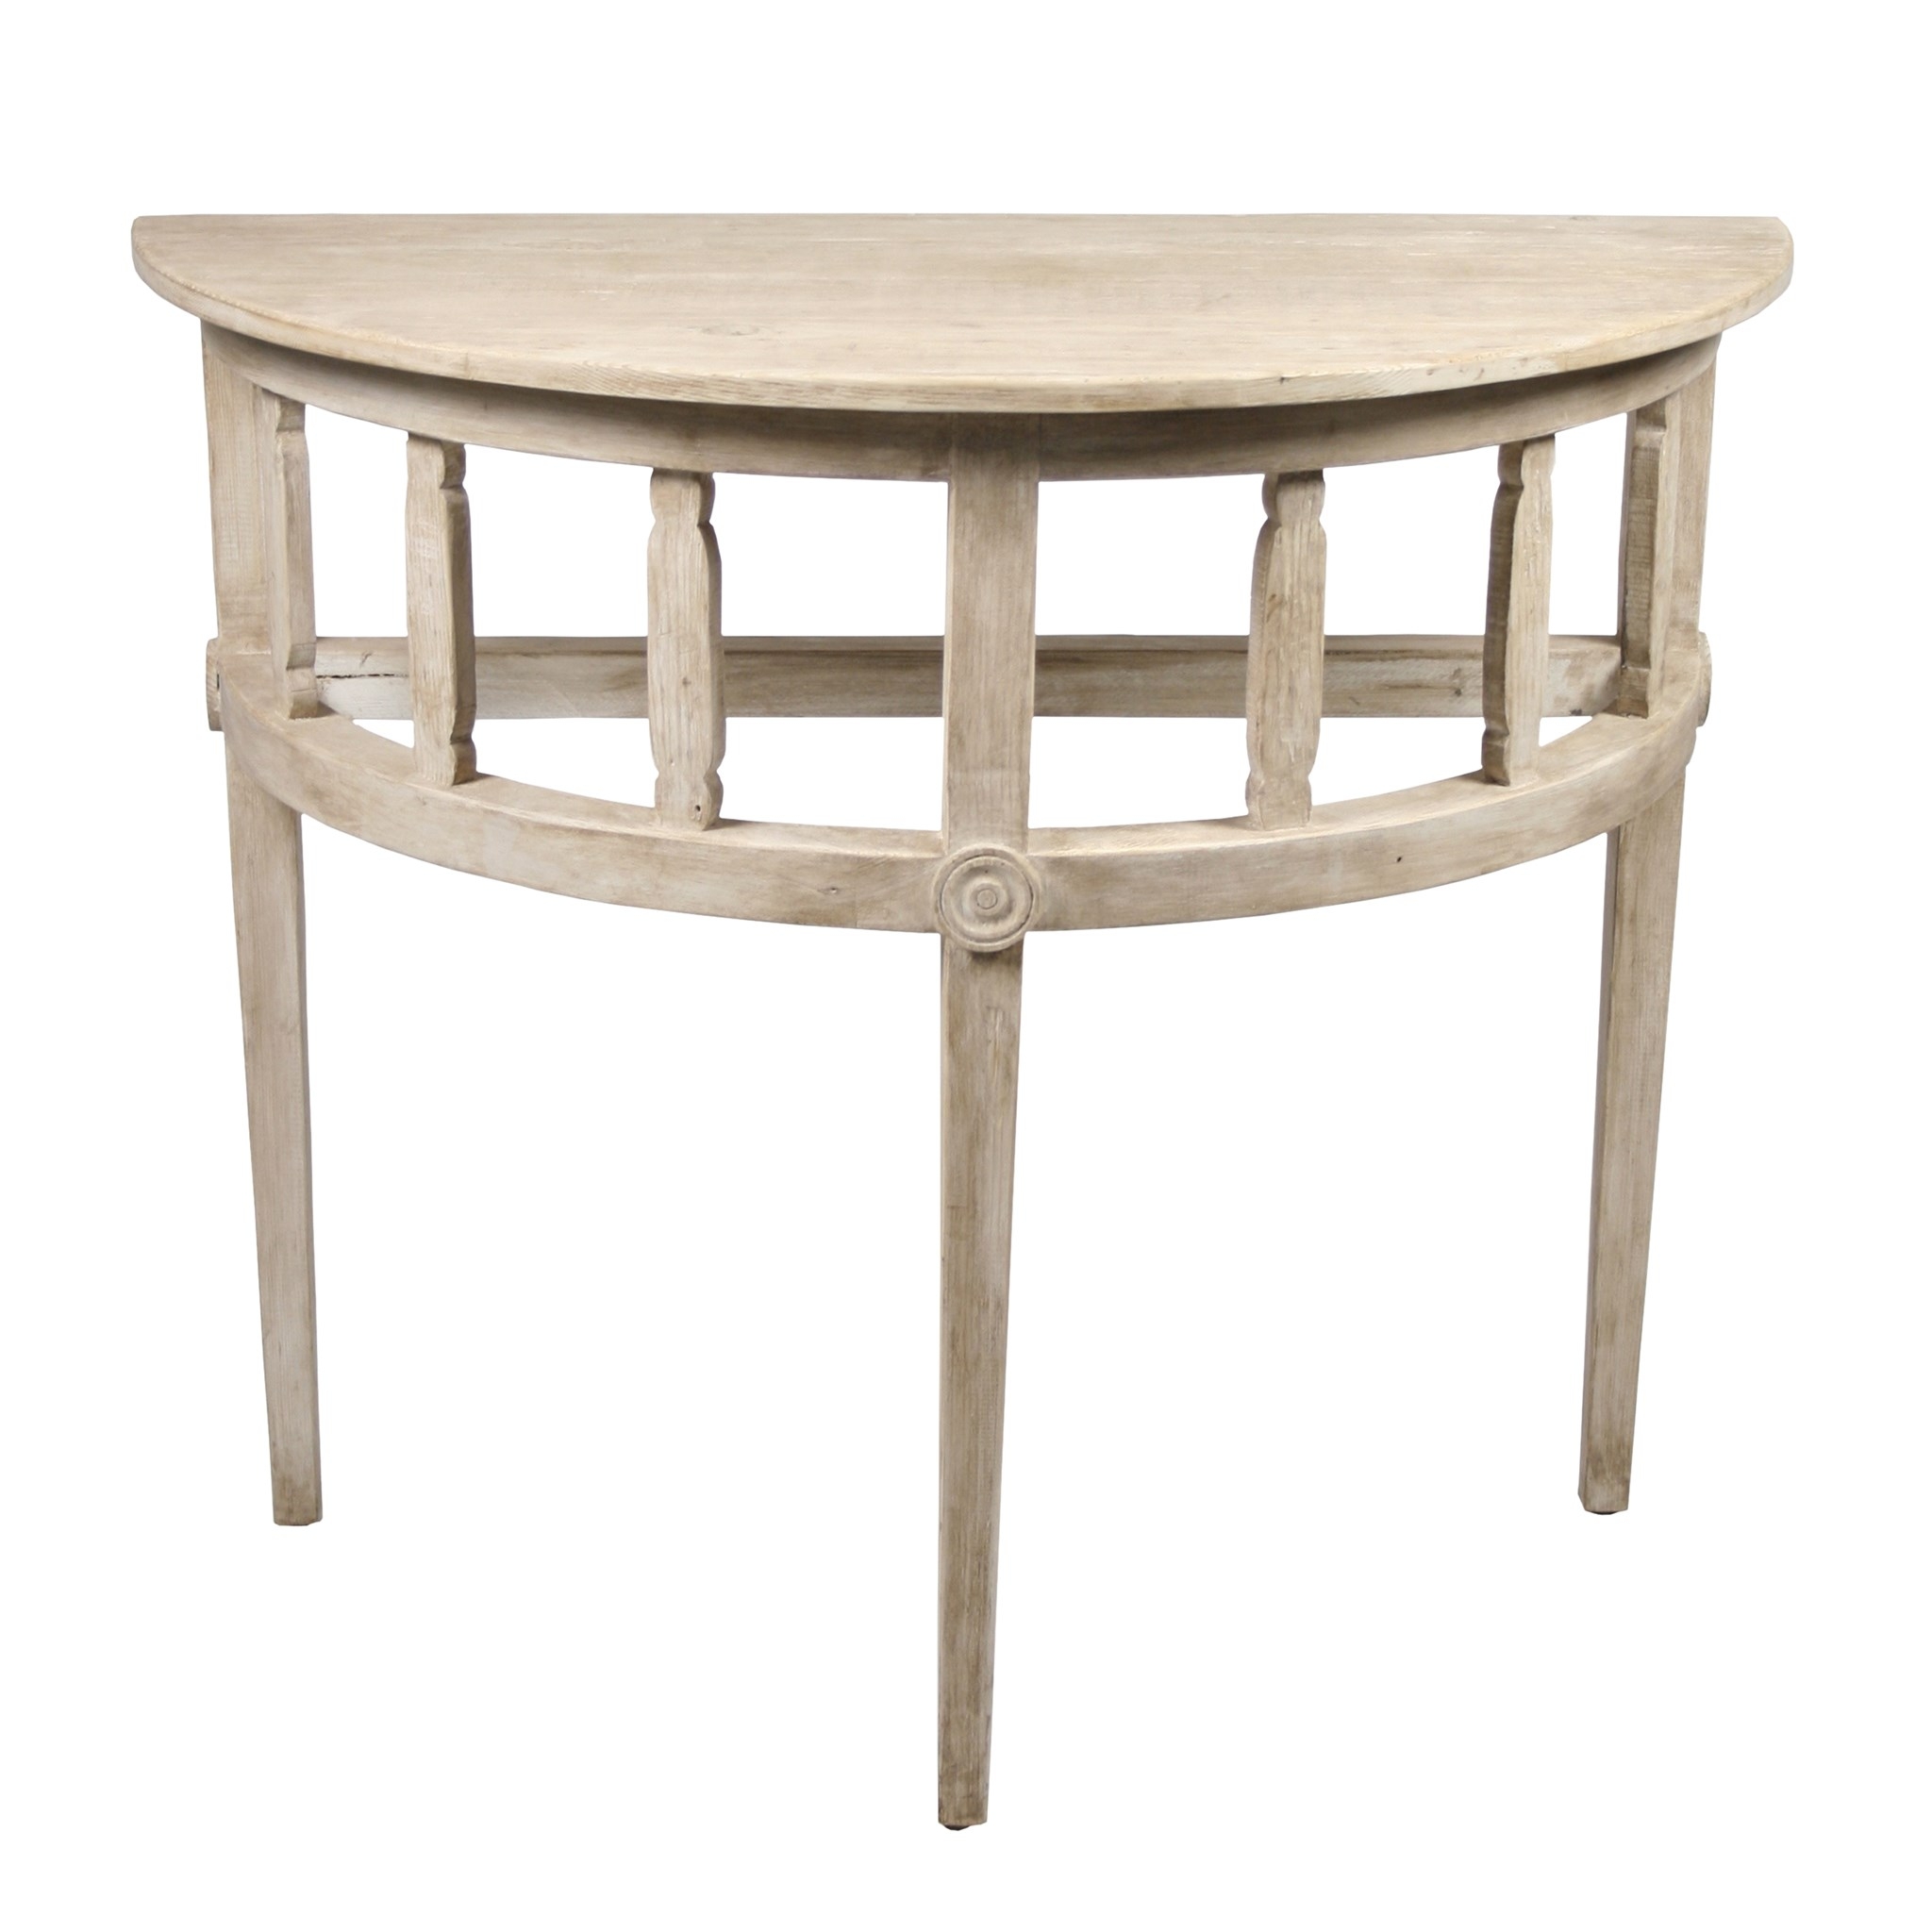 Demilune table with a gray wash wax finish tailored and